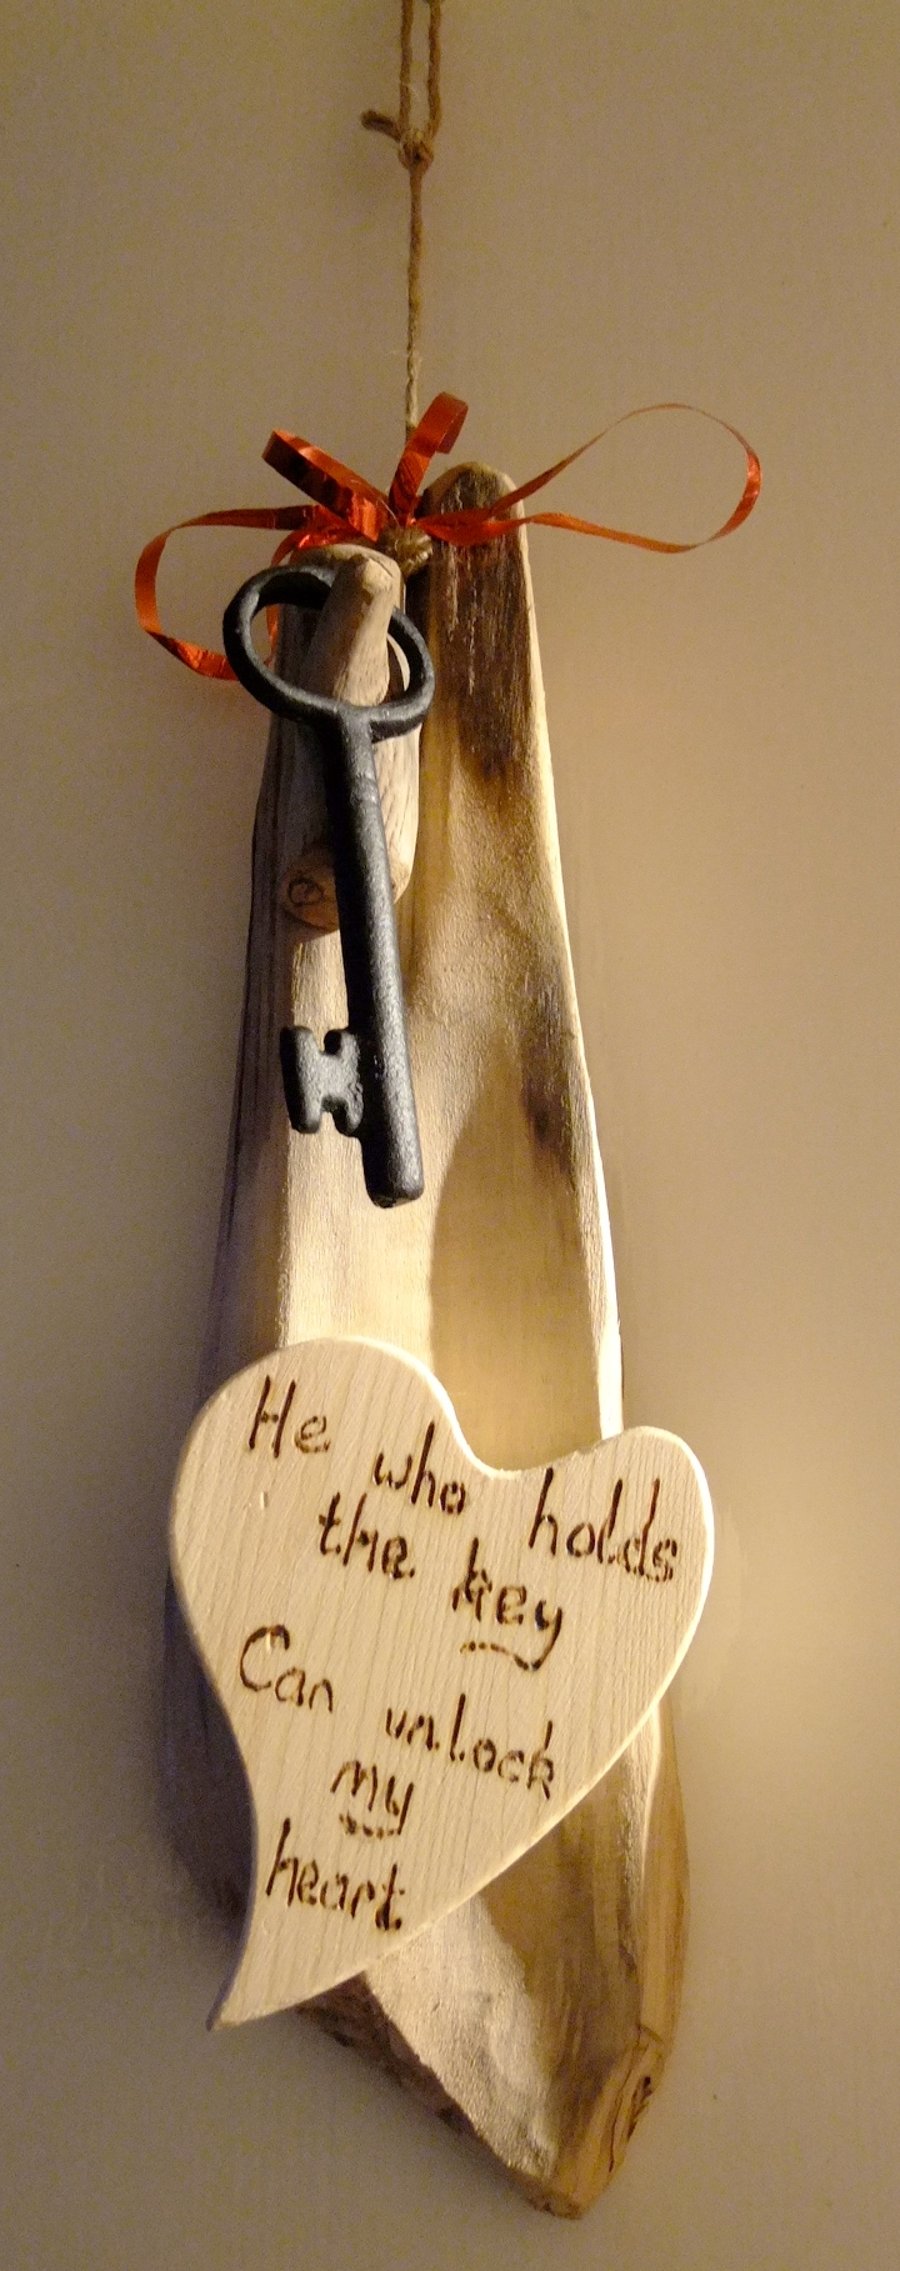 He would holds the key can unlock my Heart,     Valentine gift.